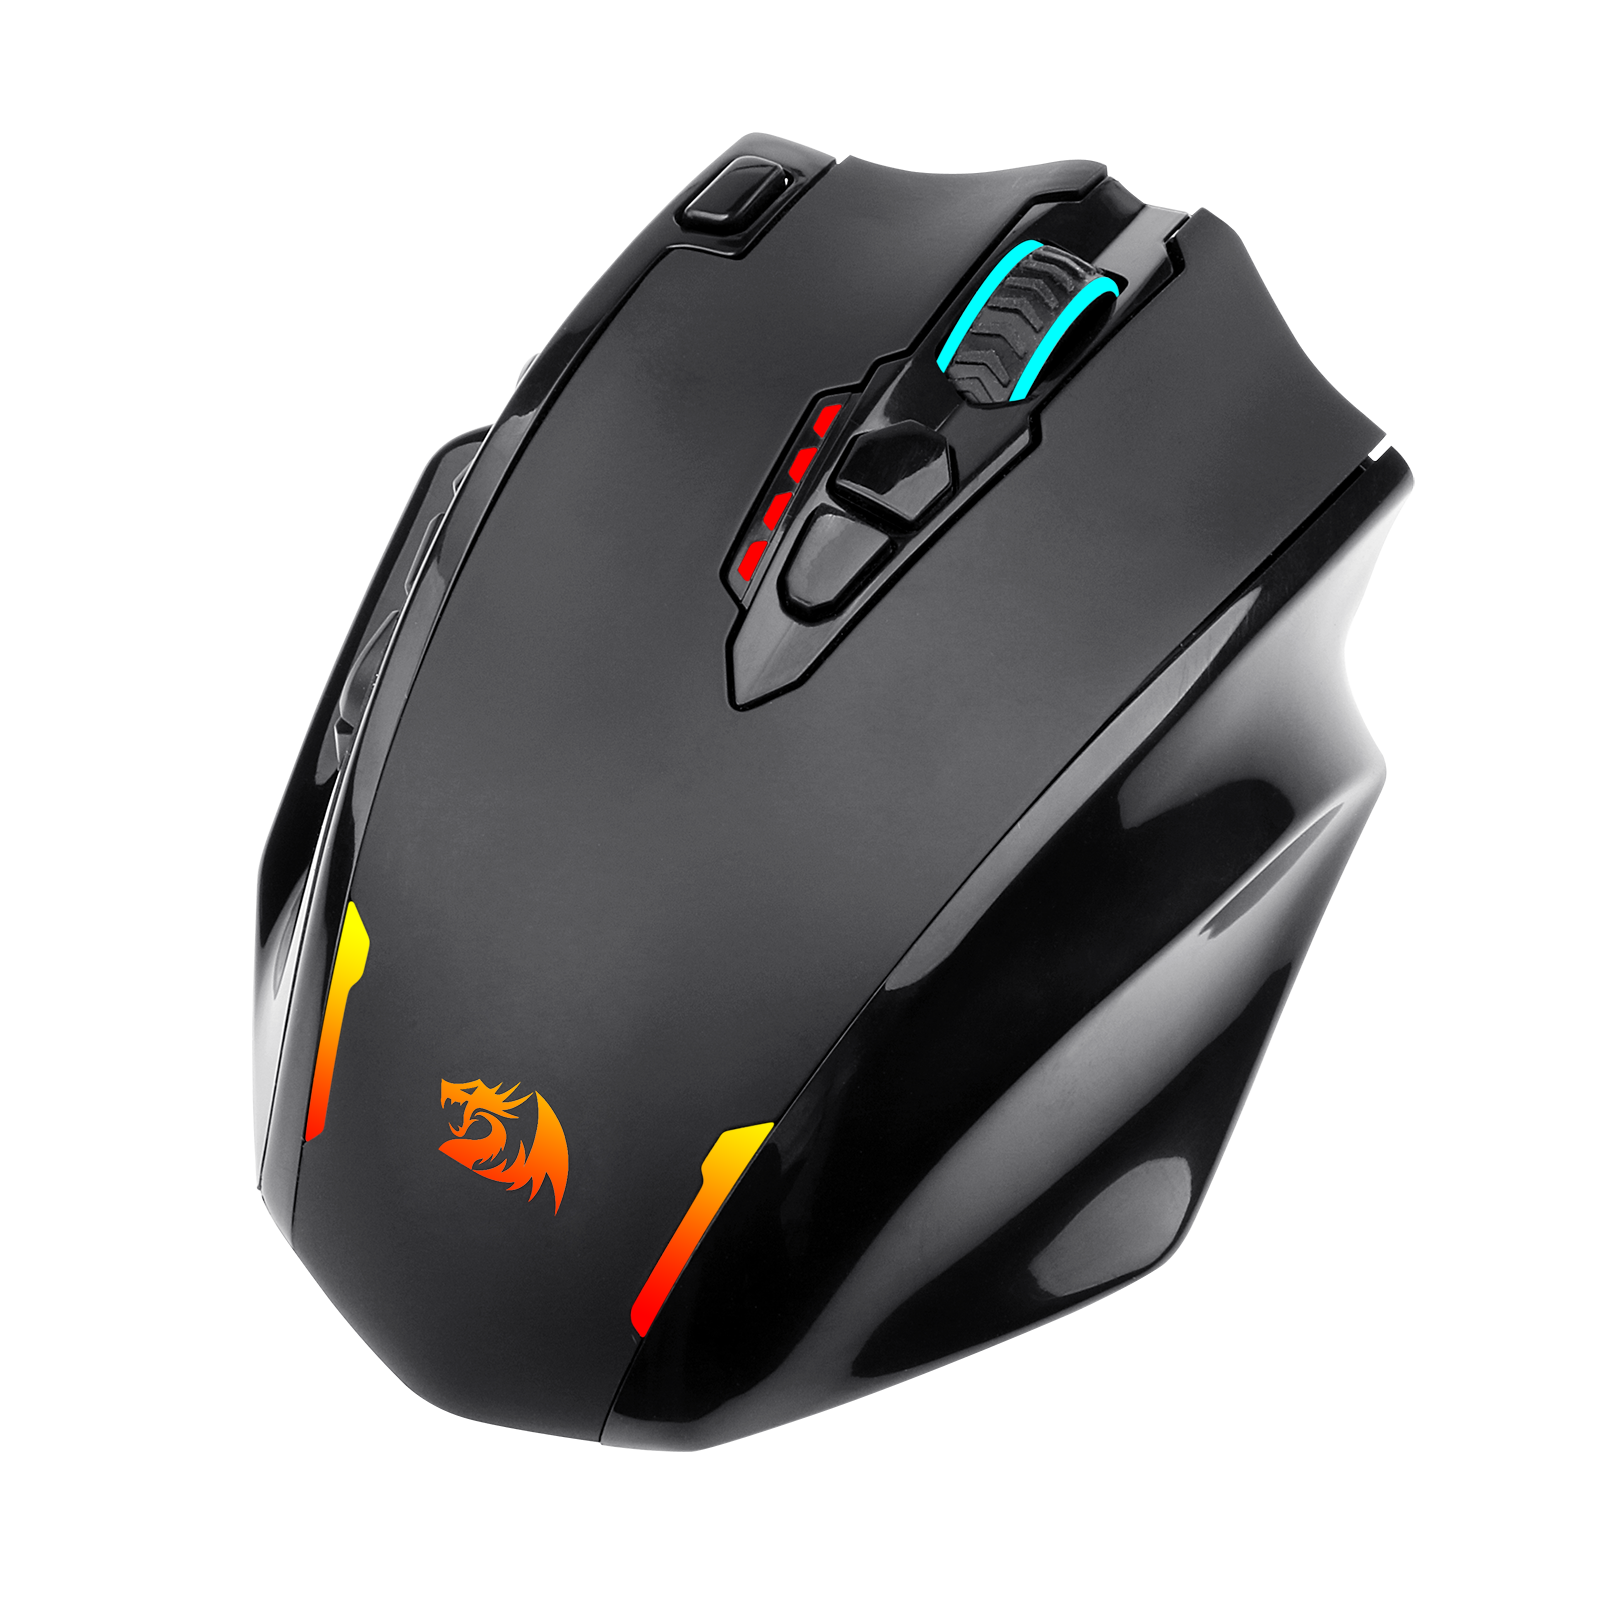 Redragon M913 Impact Elite Wireless Gaming Mouse, 16000 DPI Wired/Wire –  REDRAGON ZONE